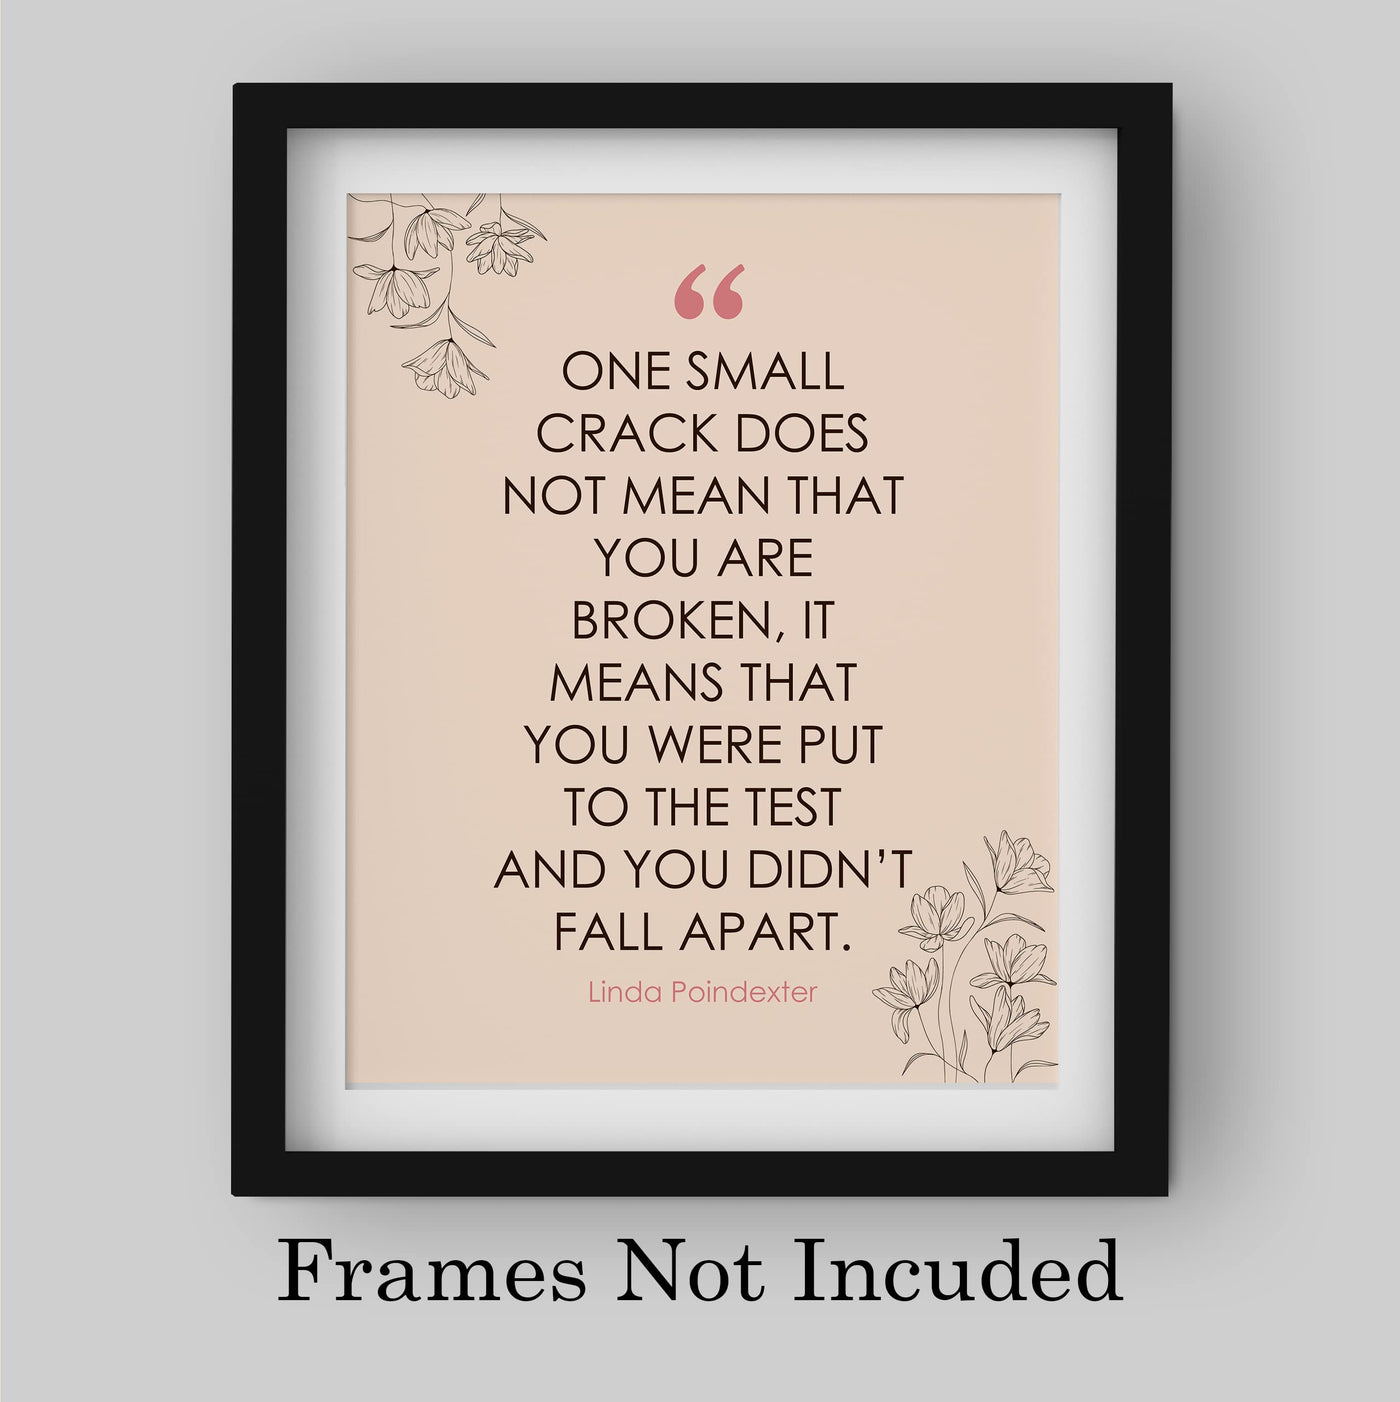 One Small Crack Does Not Mean You're Broken Inspirational Quotes Wall Art Sign -8 x 10" Pink Floral Wall Print -Ready to Frame. Motivational Home-Office-Classroom-Library Decor. Great Reminder!